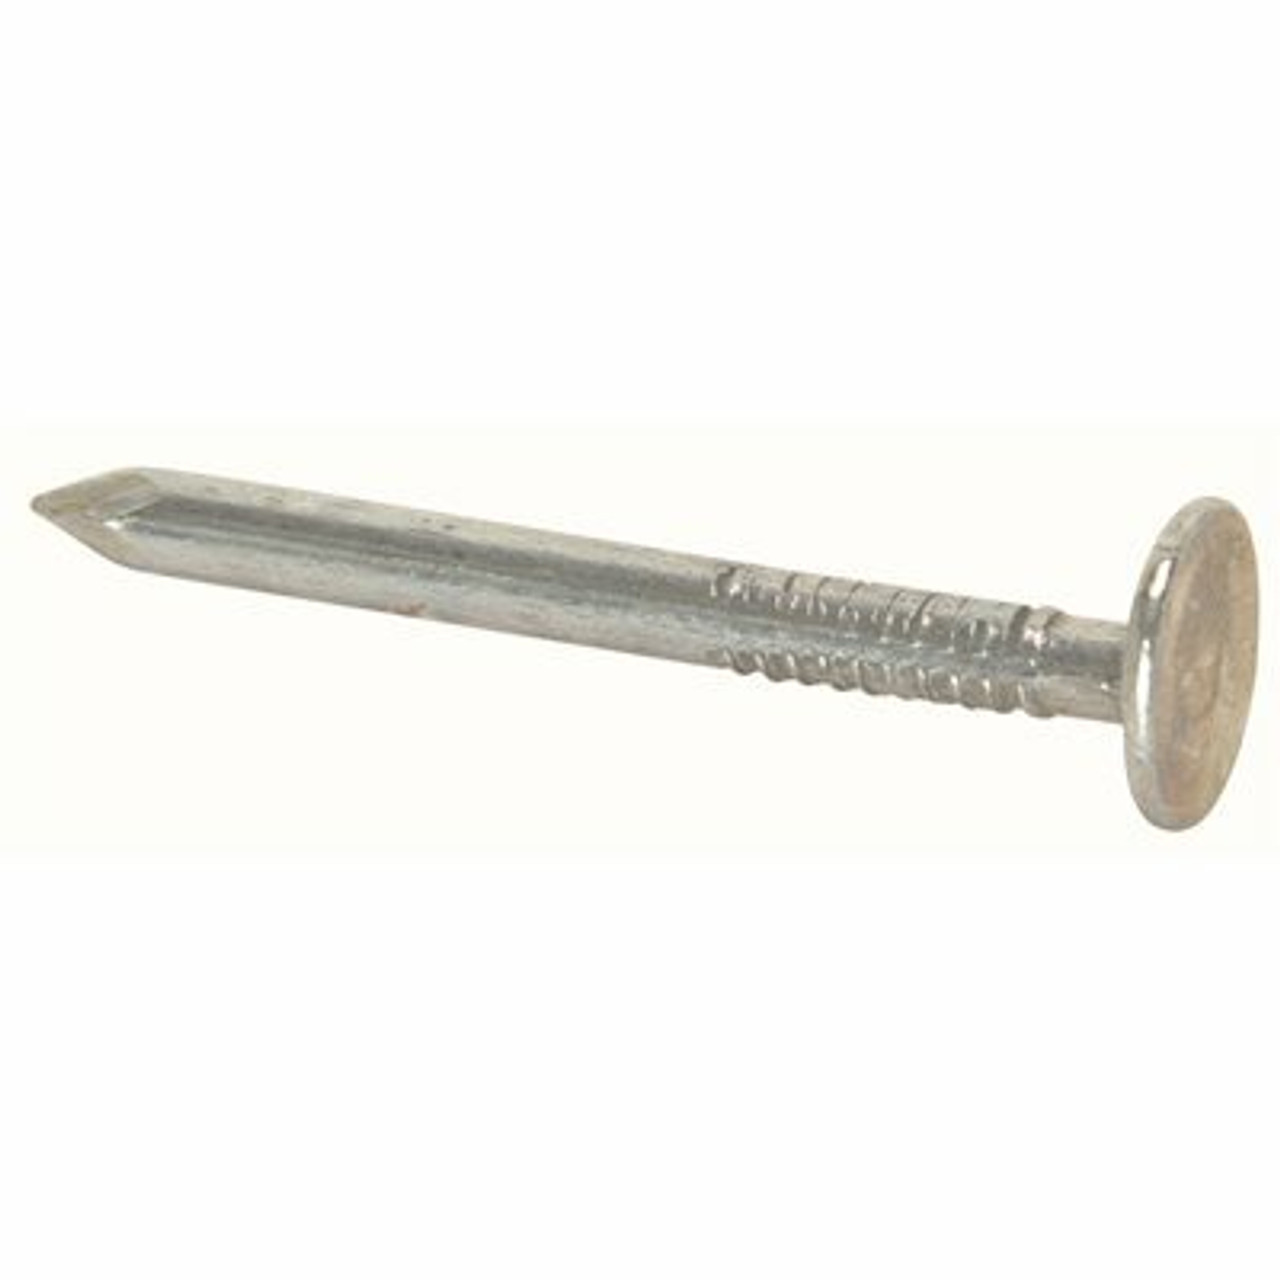 1-1/2 In. Roofing Nail (1 Lb. Box)